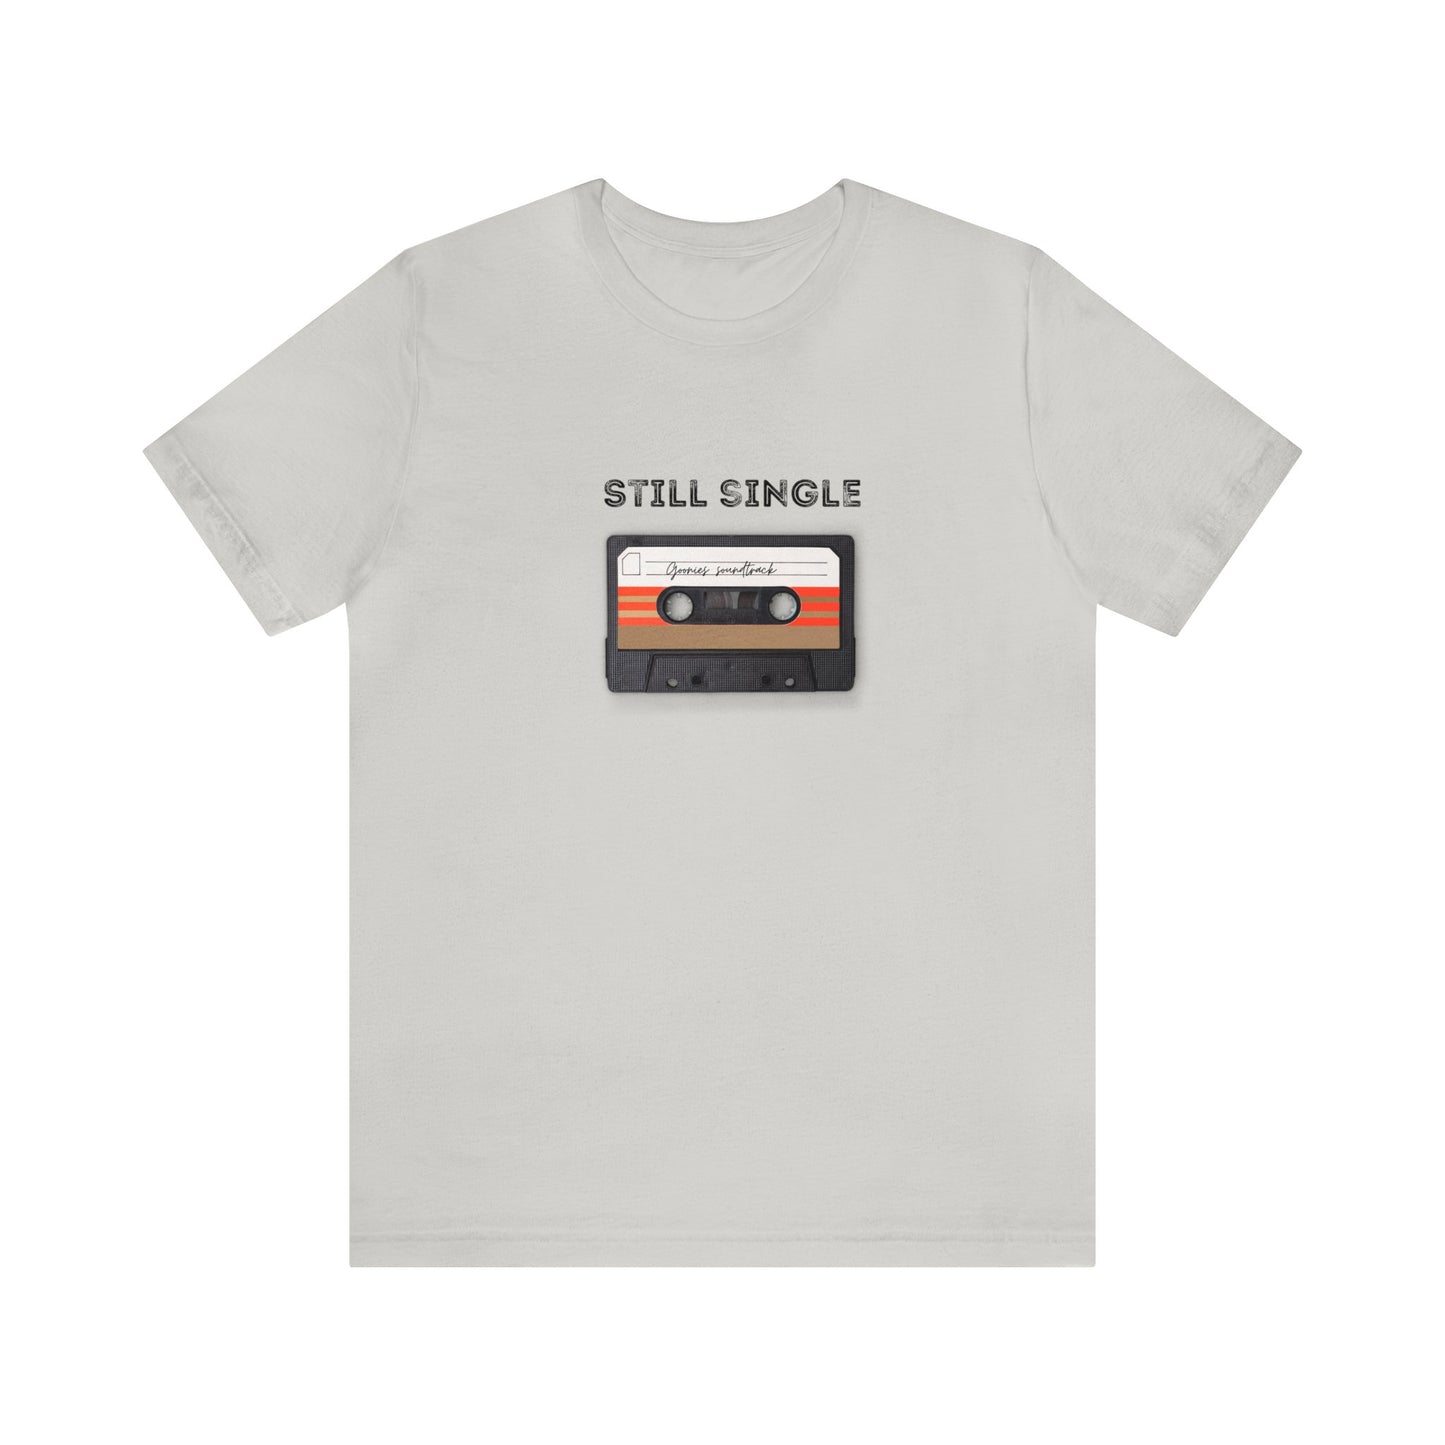 Mixed tape "Still single" quote // Cute and trendy 80's tee